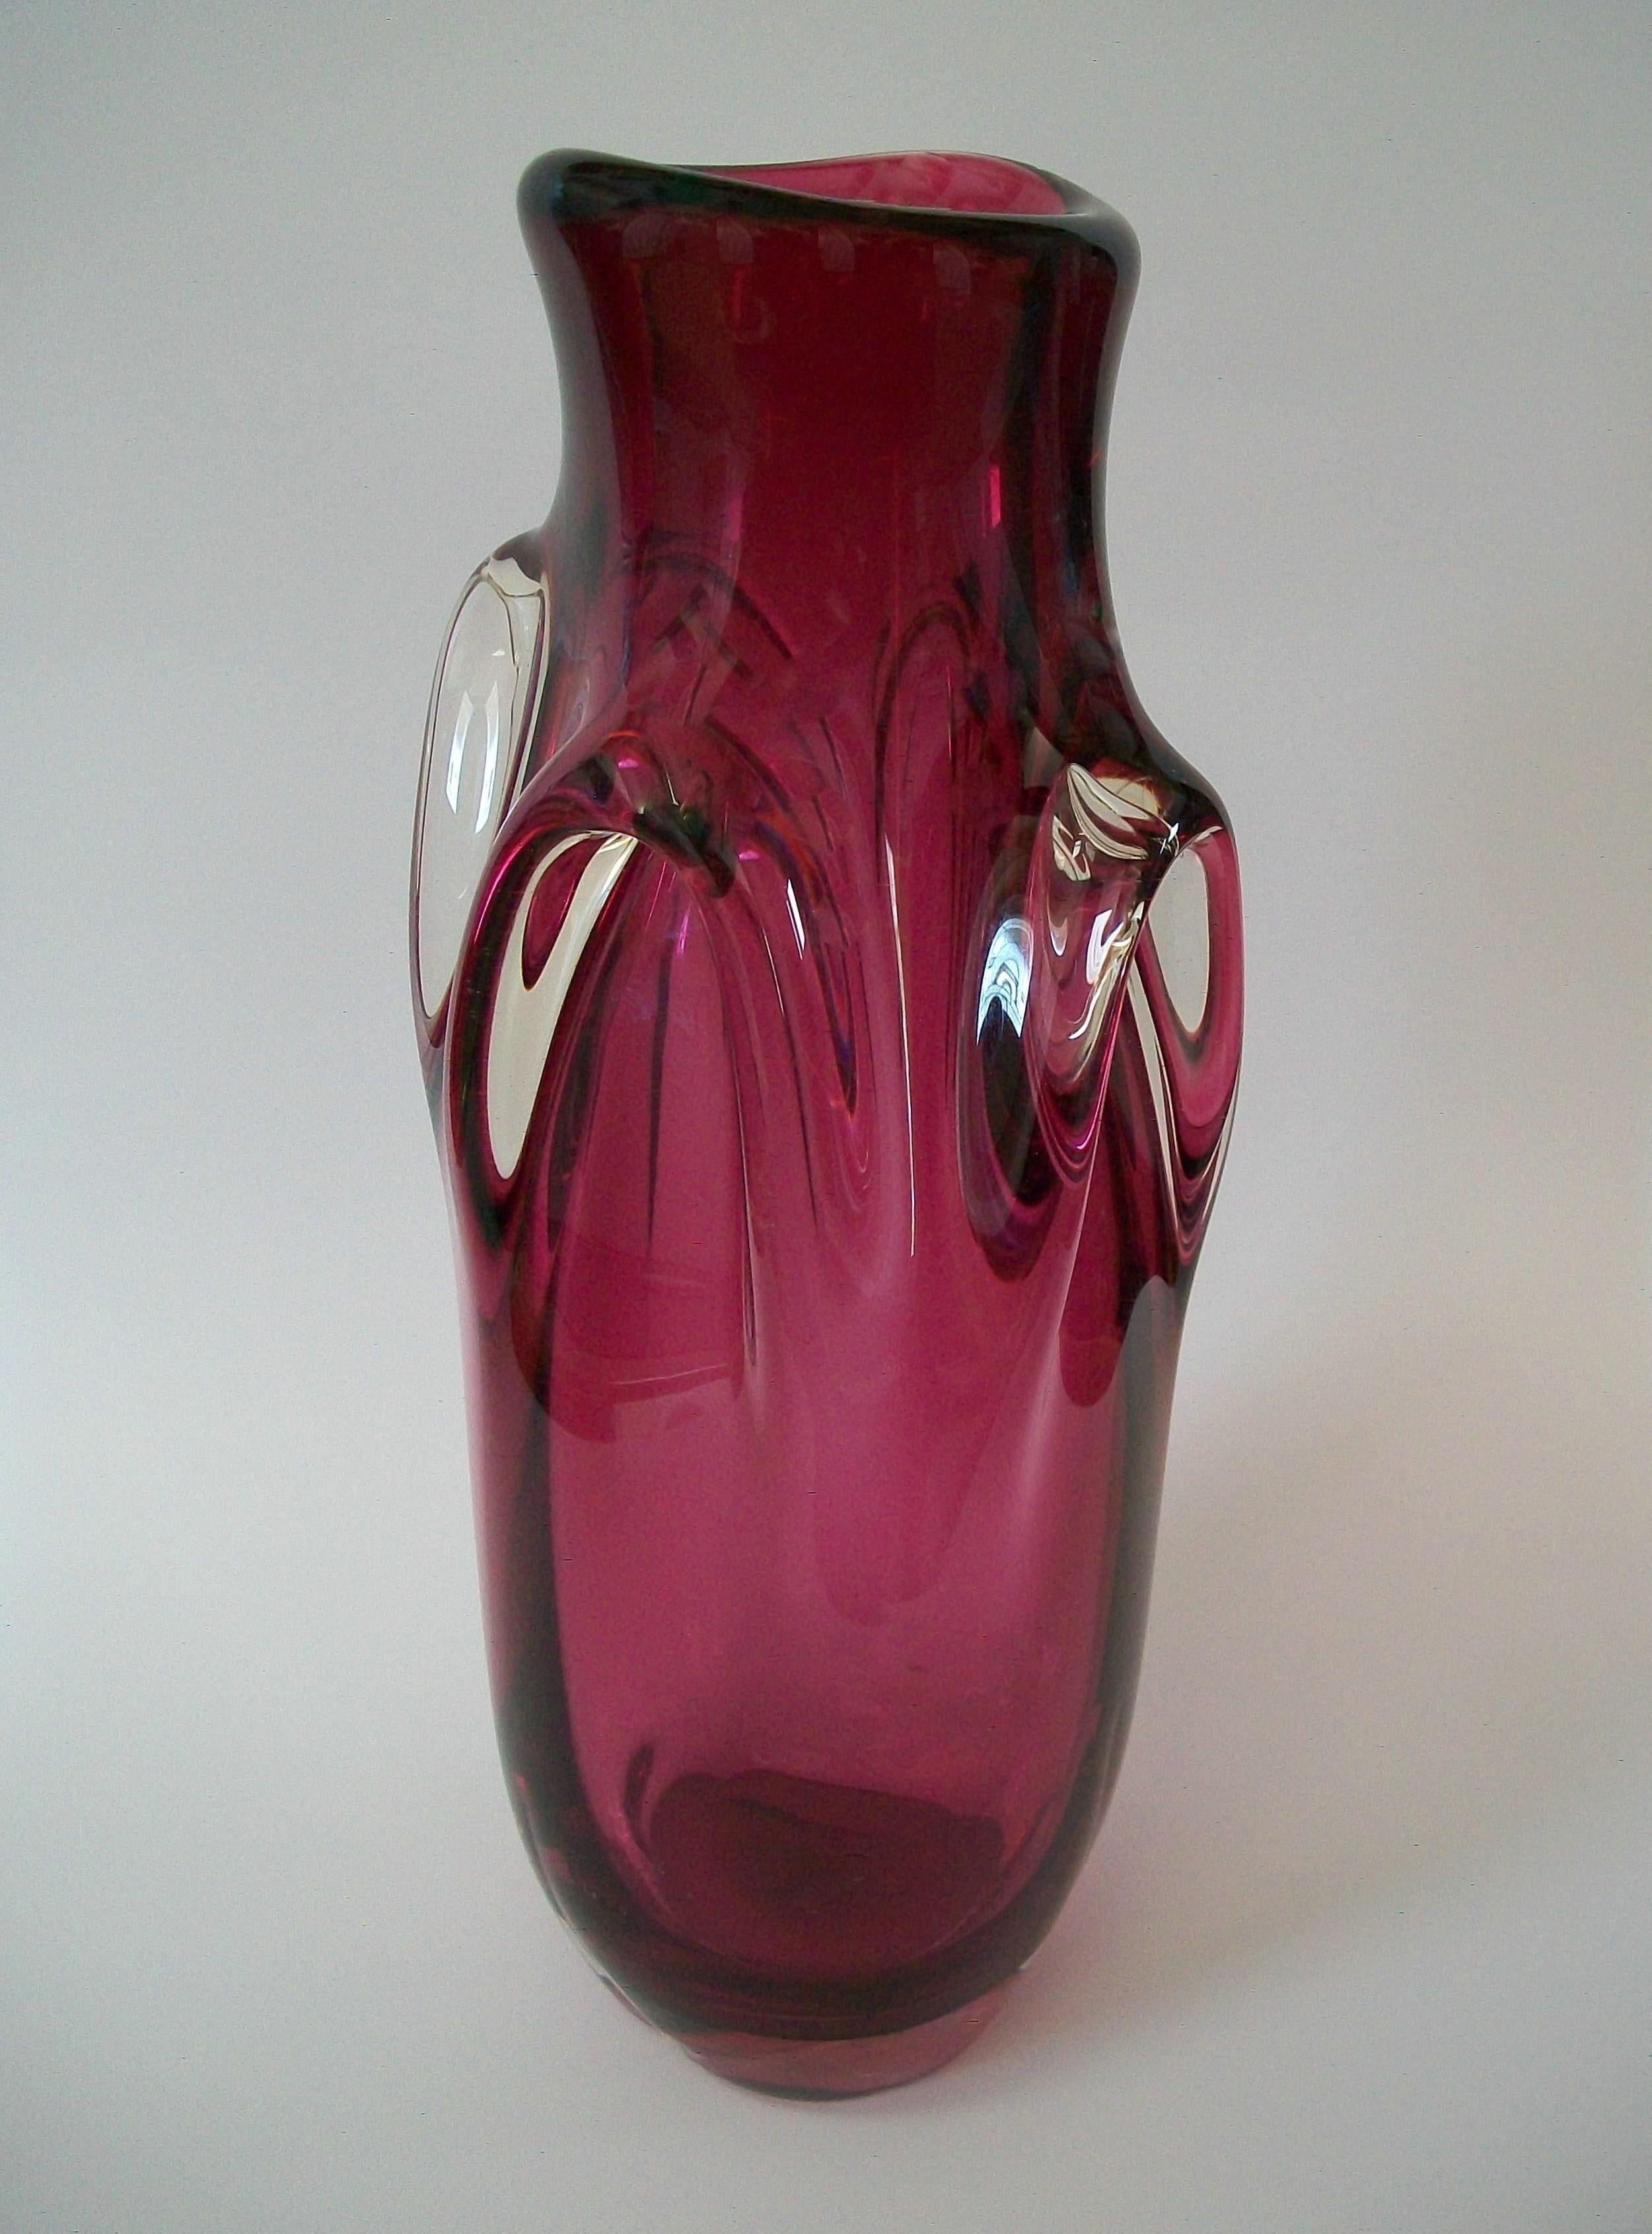 VAL SAINT LAMBERT (Manufacturer - Attributed) - GUIDO BON (Designer - Attributed) - Large Mid Century studio glass vase - featuring staggered clear glass arches (typical of Guido Bon's designs) - striking pink / cranberry color to the body -